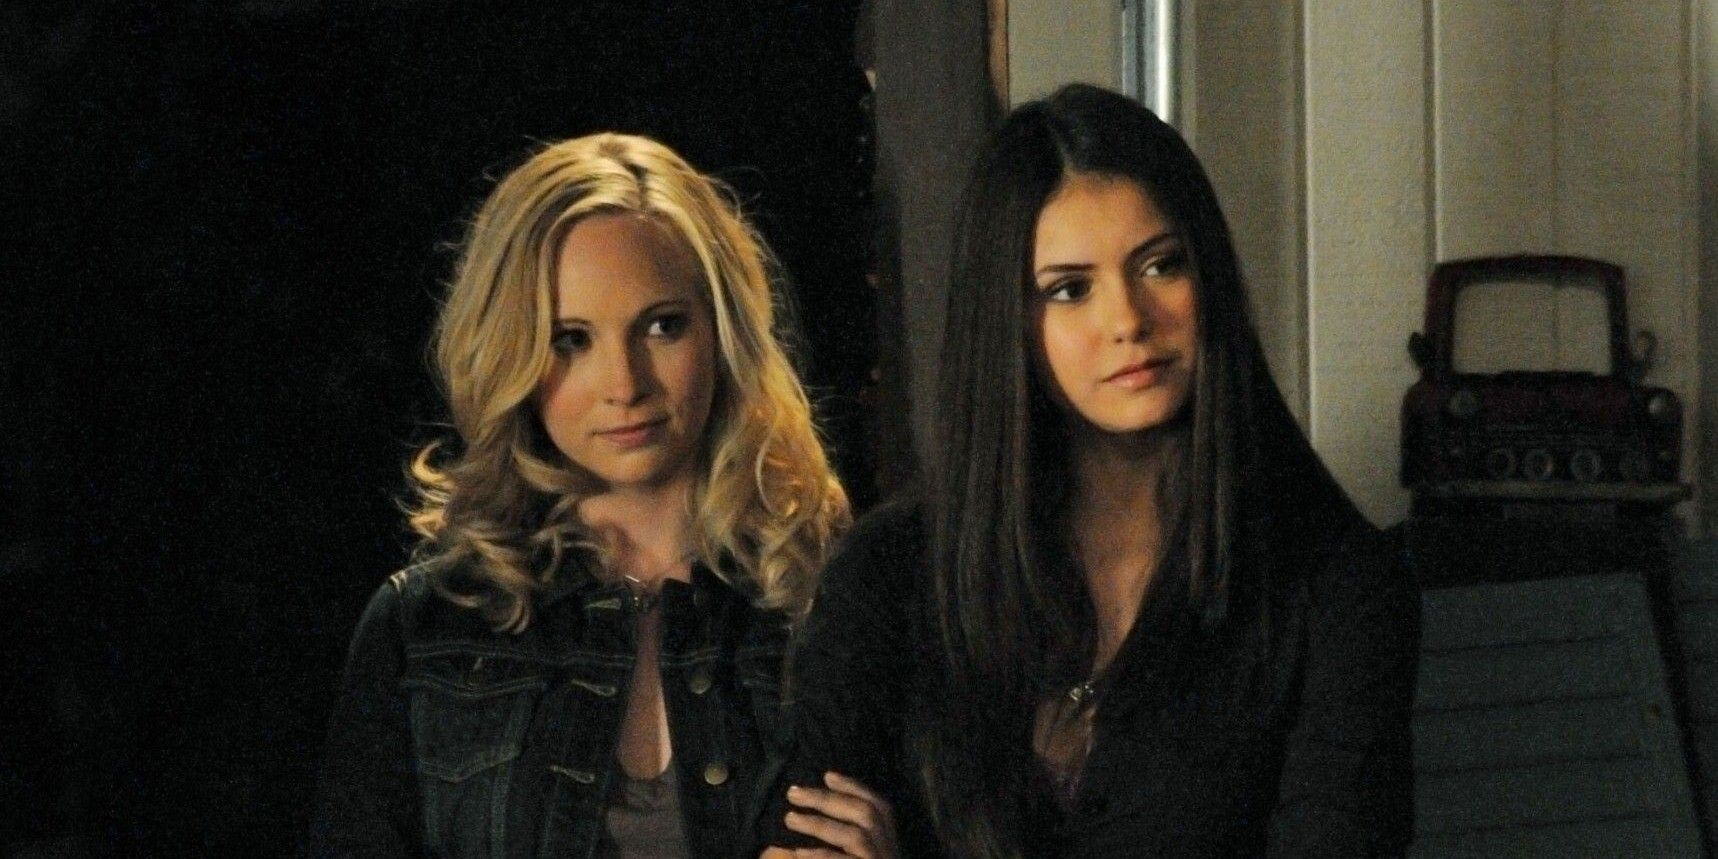 Caroline and Elena on a double date in The Vampire Diaries